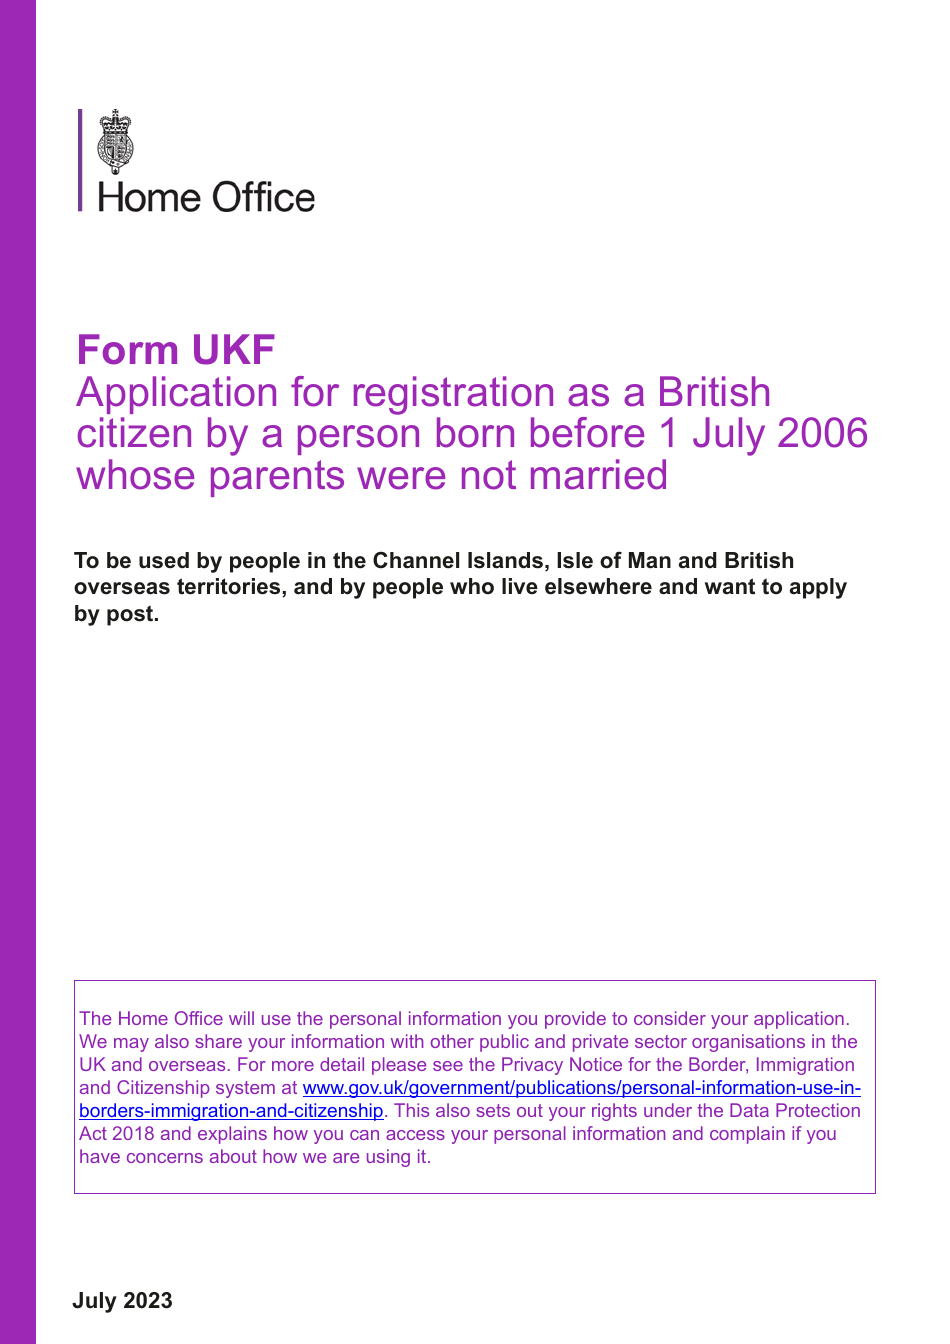 Form UKF Application for Registration as a British Citizen by a Person Born Before 1 July 2006 Whose Parents Were Not Married - United Kingdom, Page 1